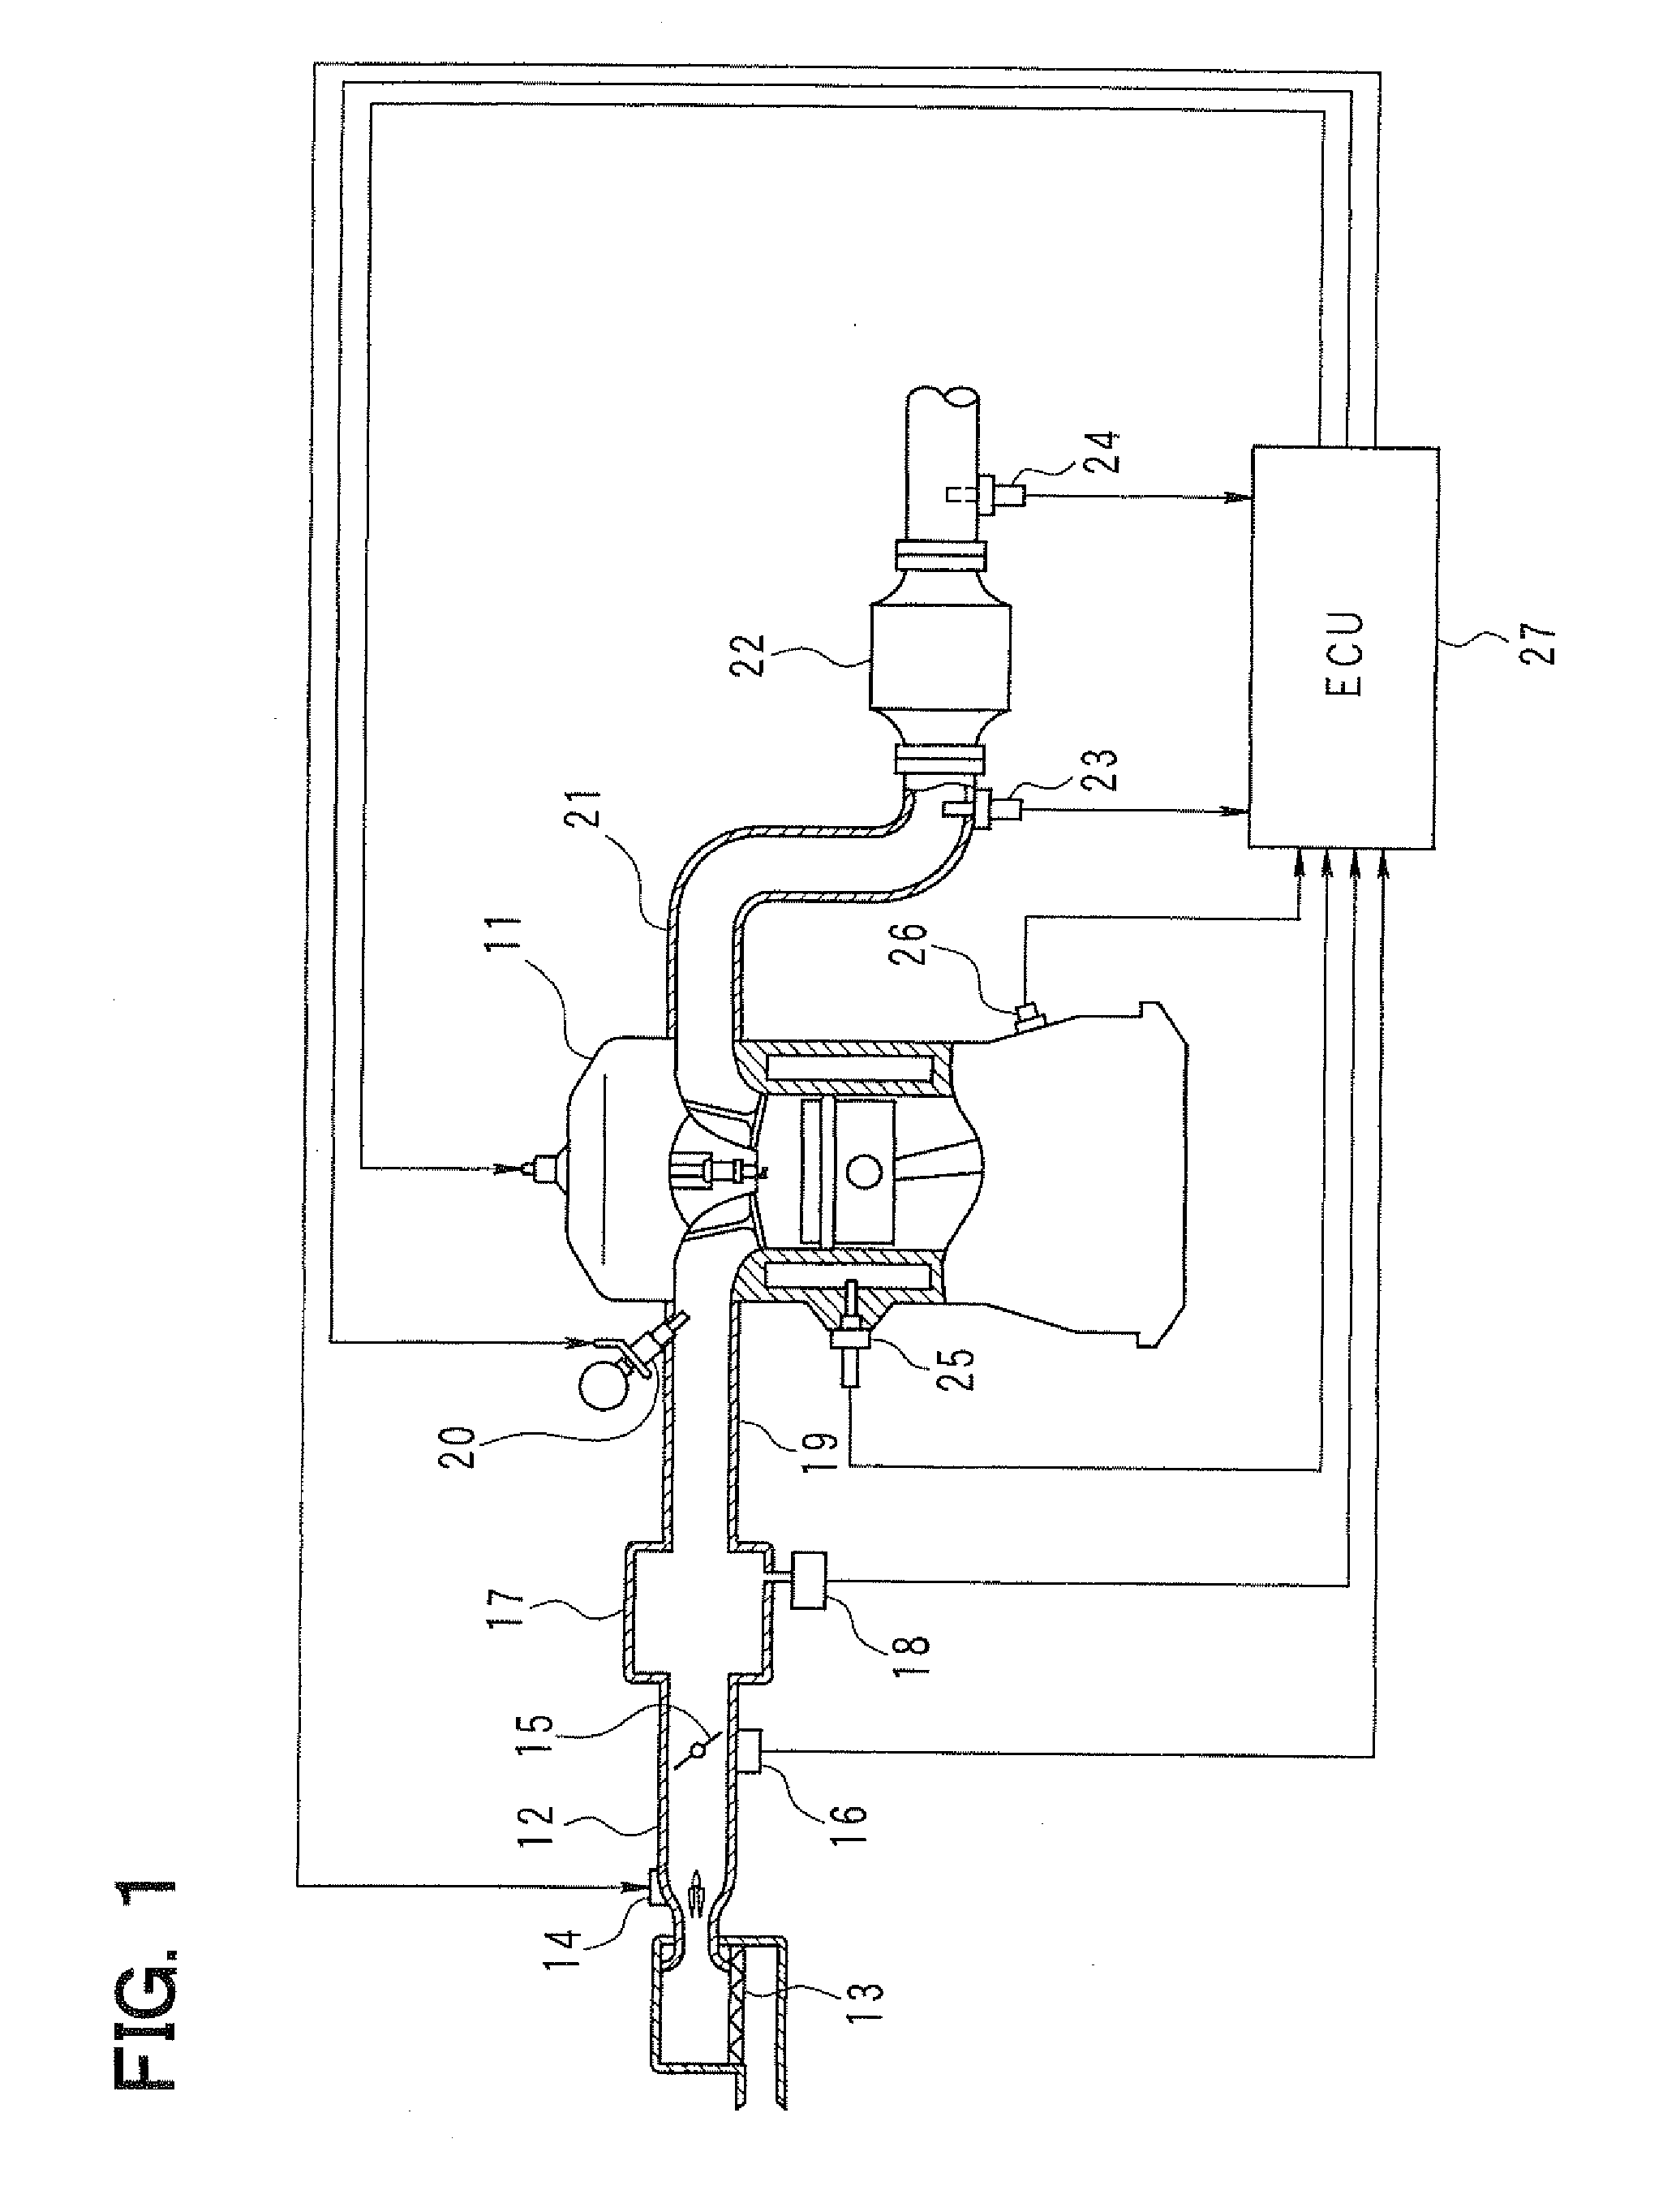 Air-fuel ratio control device of internal combustion engine